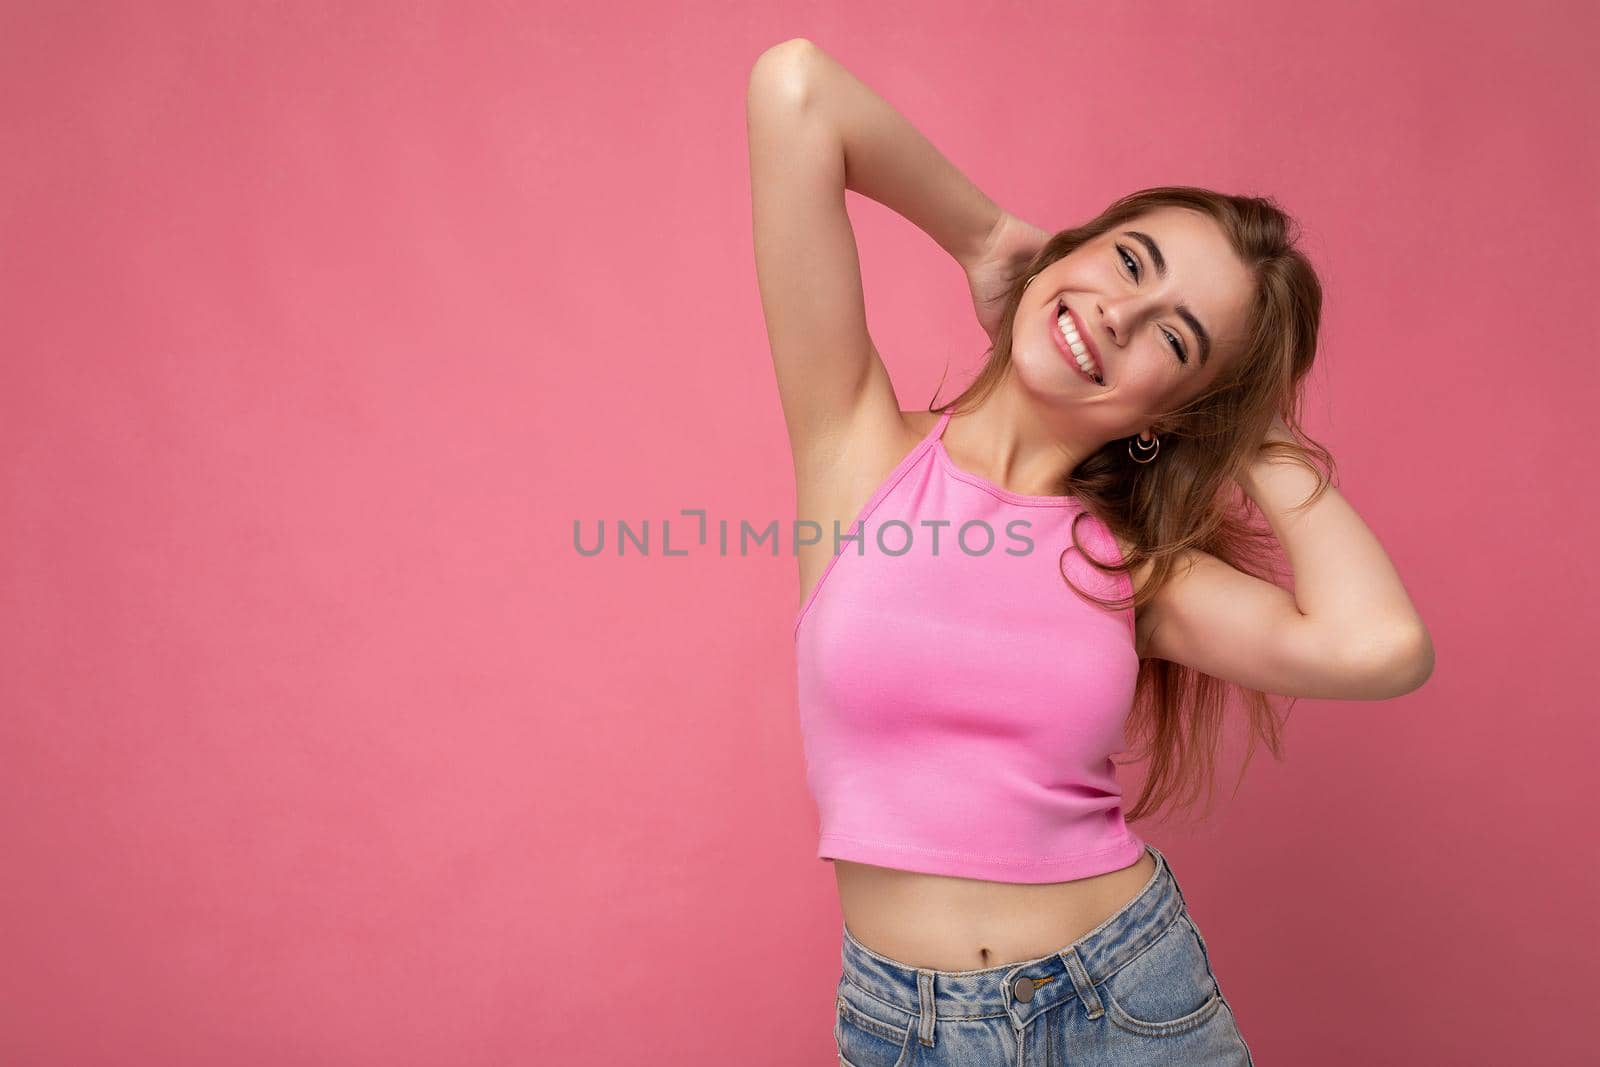 Photo of beautiful positive smiling adult woman wearing stylish clothes standing isolated on colorful background with copy space looking at camera.